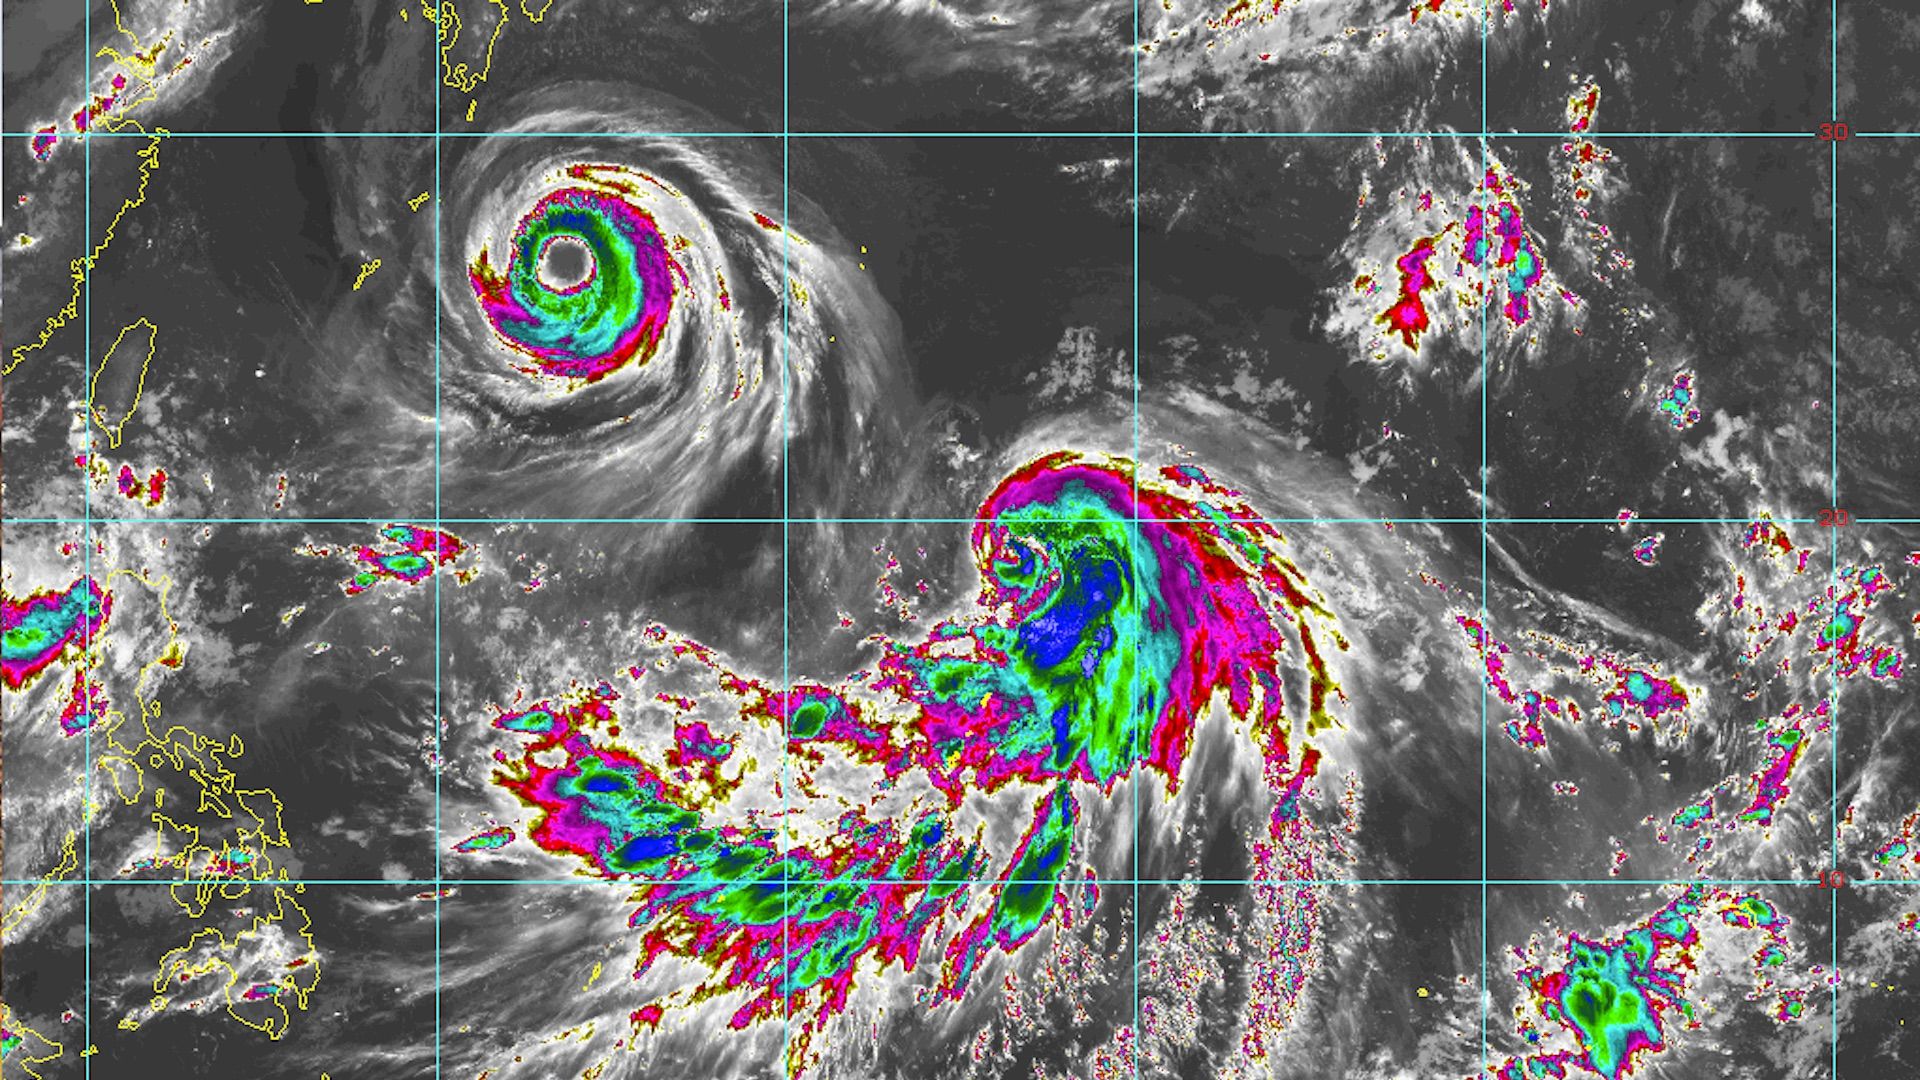 Typhoons Soulik and Cimaron shown in the Northwest Pacific Ocean on Aug. 20, 2018.